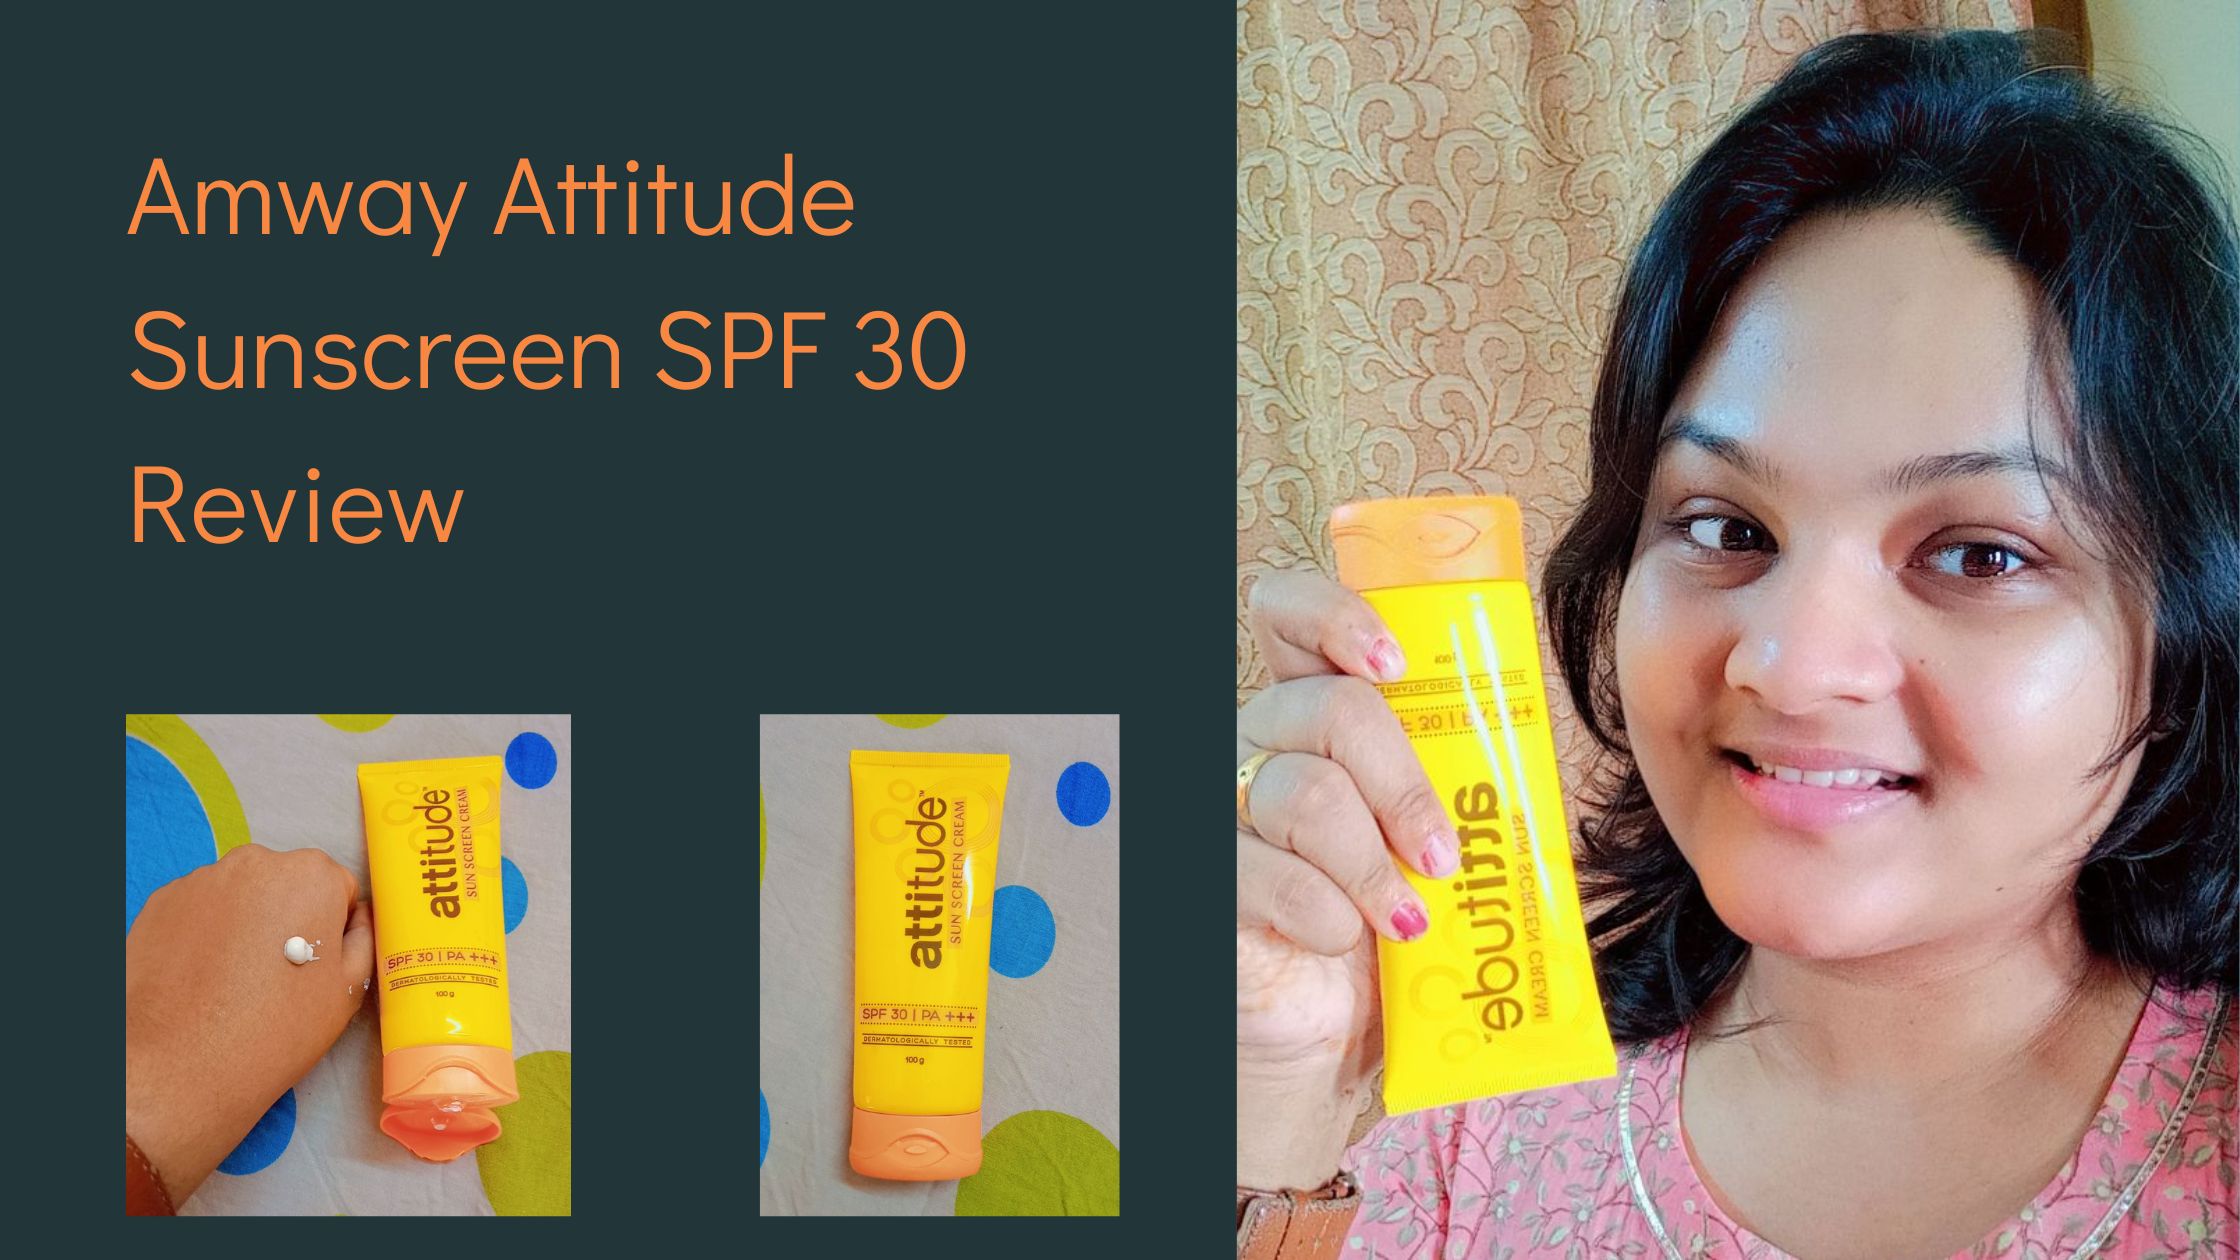 Amway Attitude Sunscreen SPF 30 Review